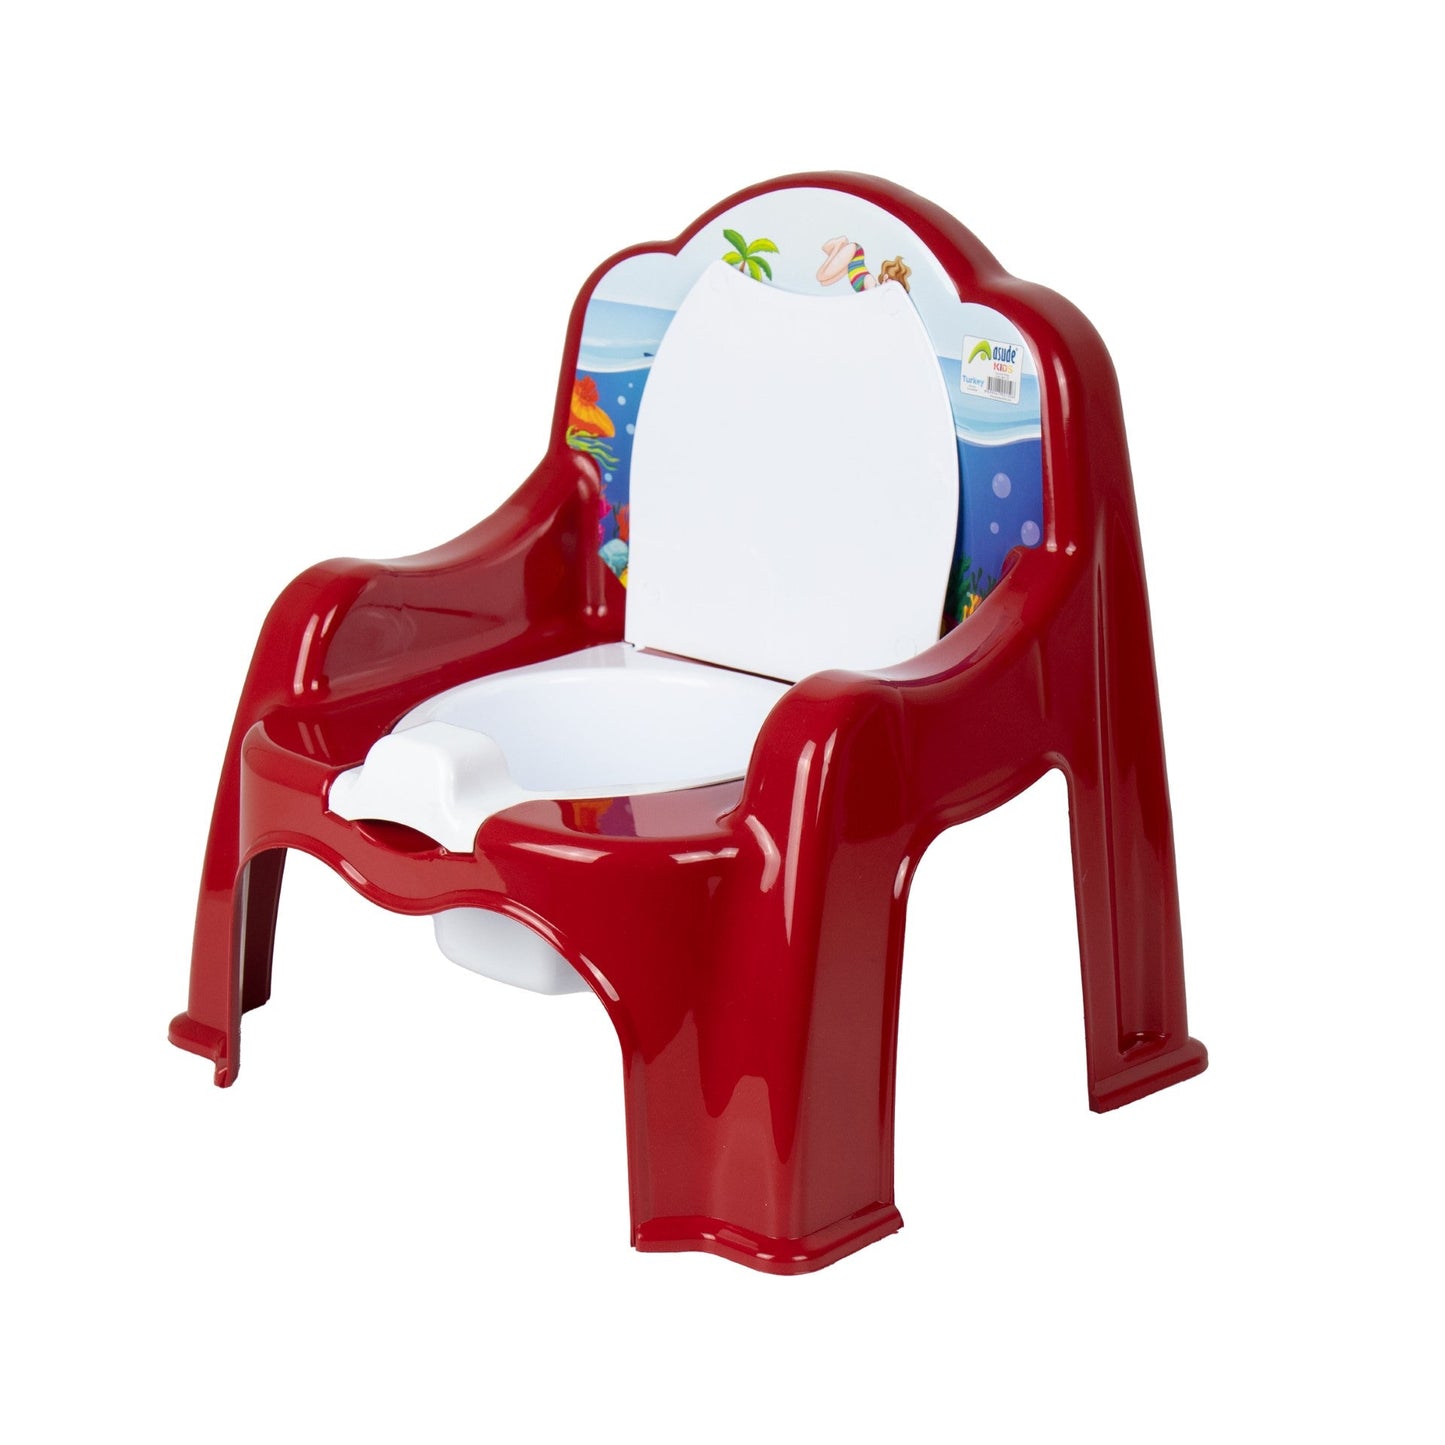 Asude Plastic Baby Potty Chair Assorted Colours 11139 / ASD159 (Parcel Rate)